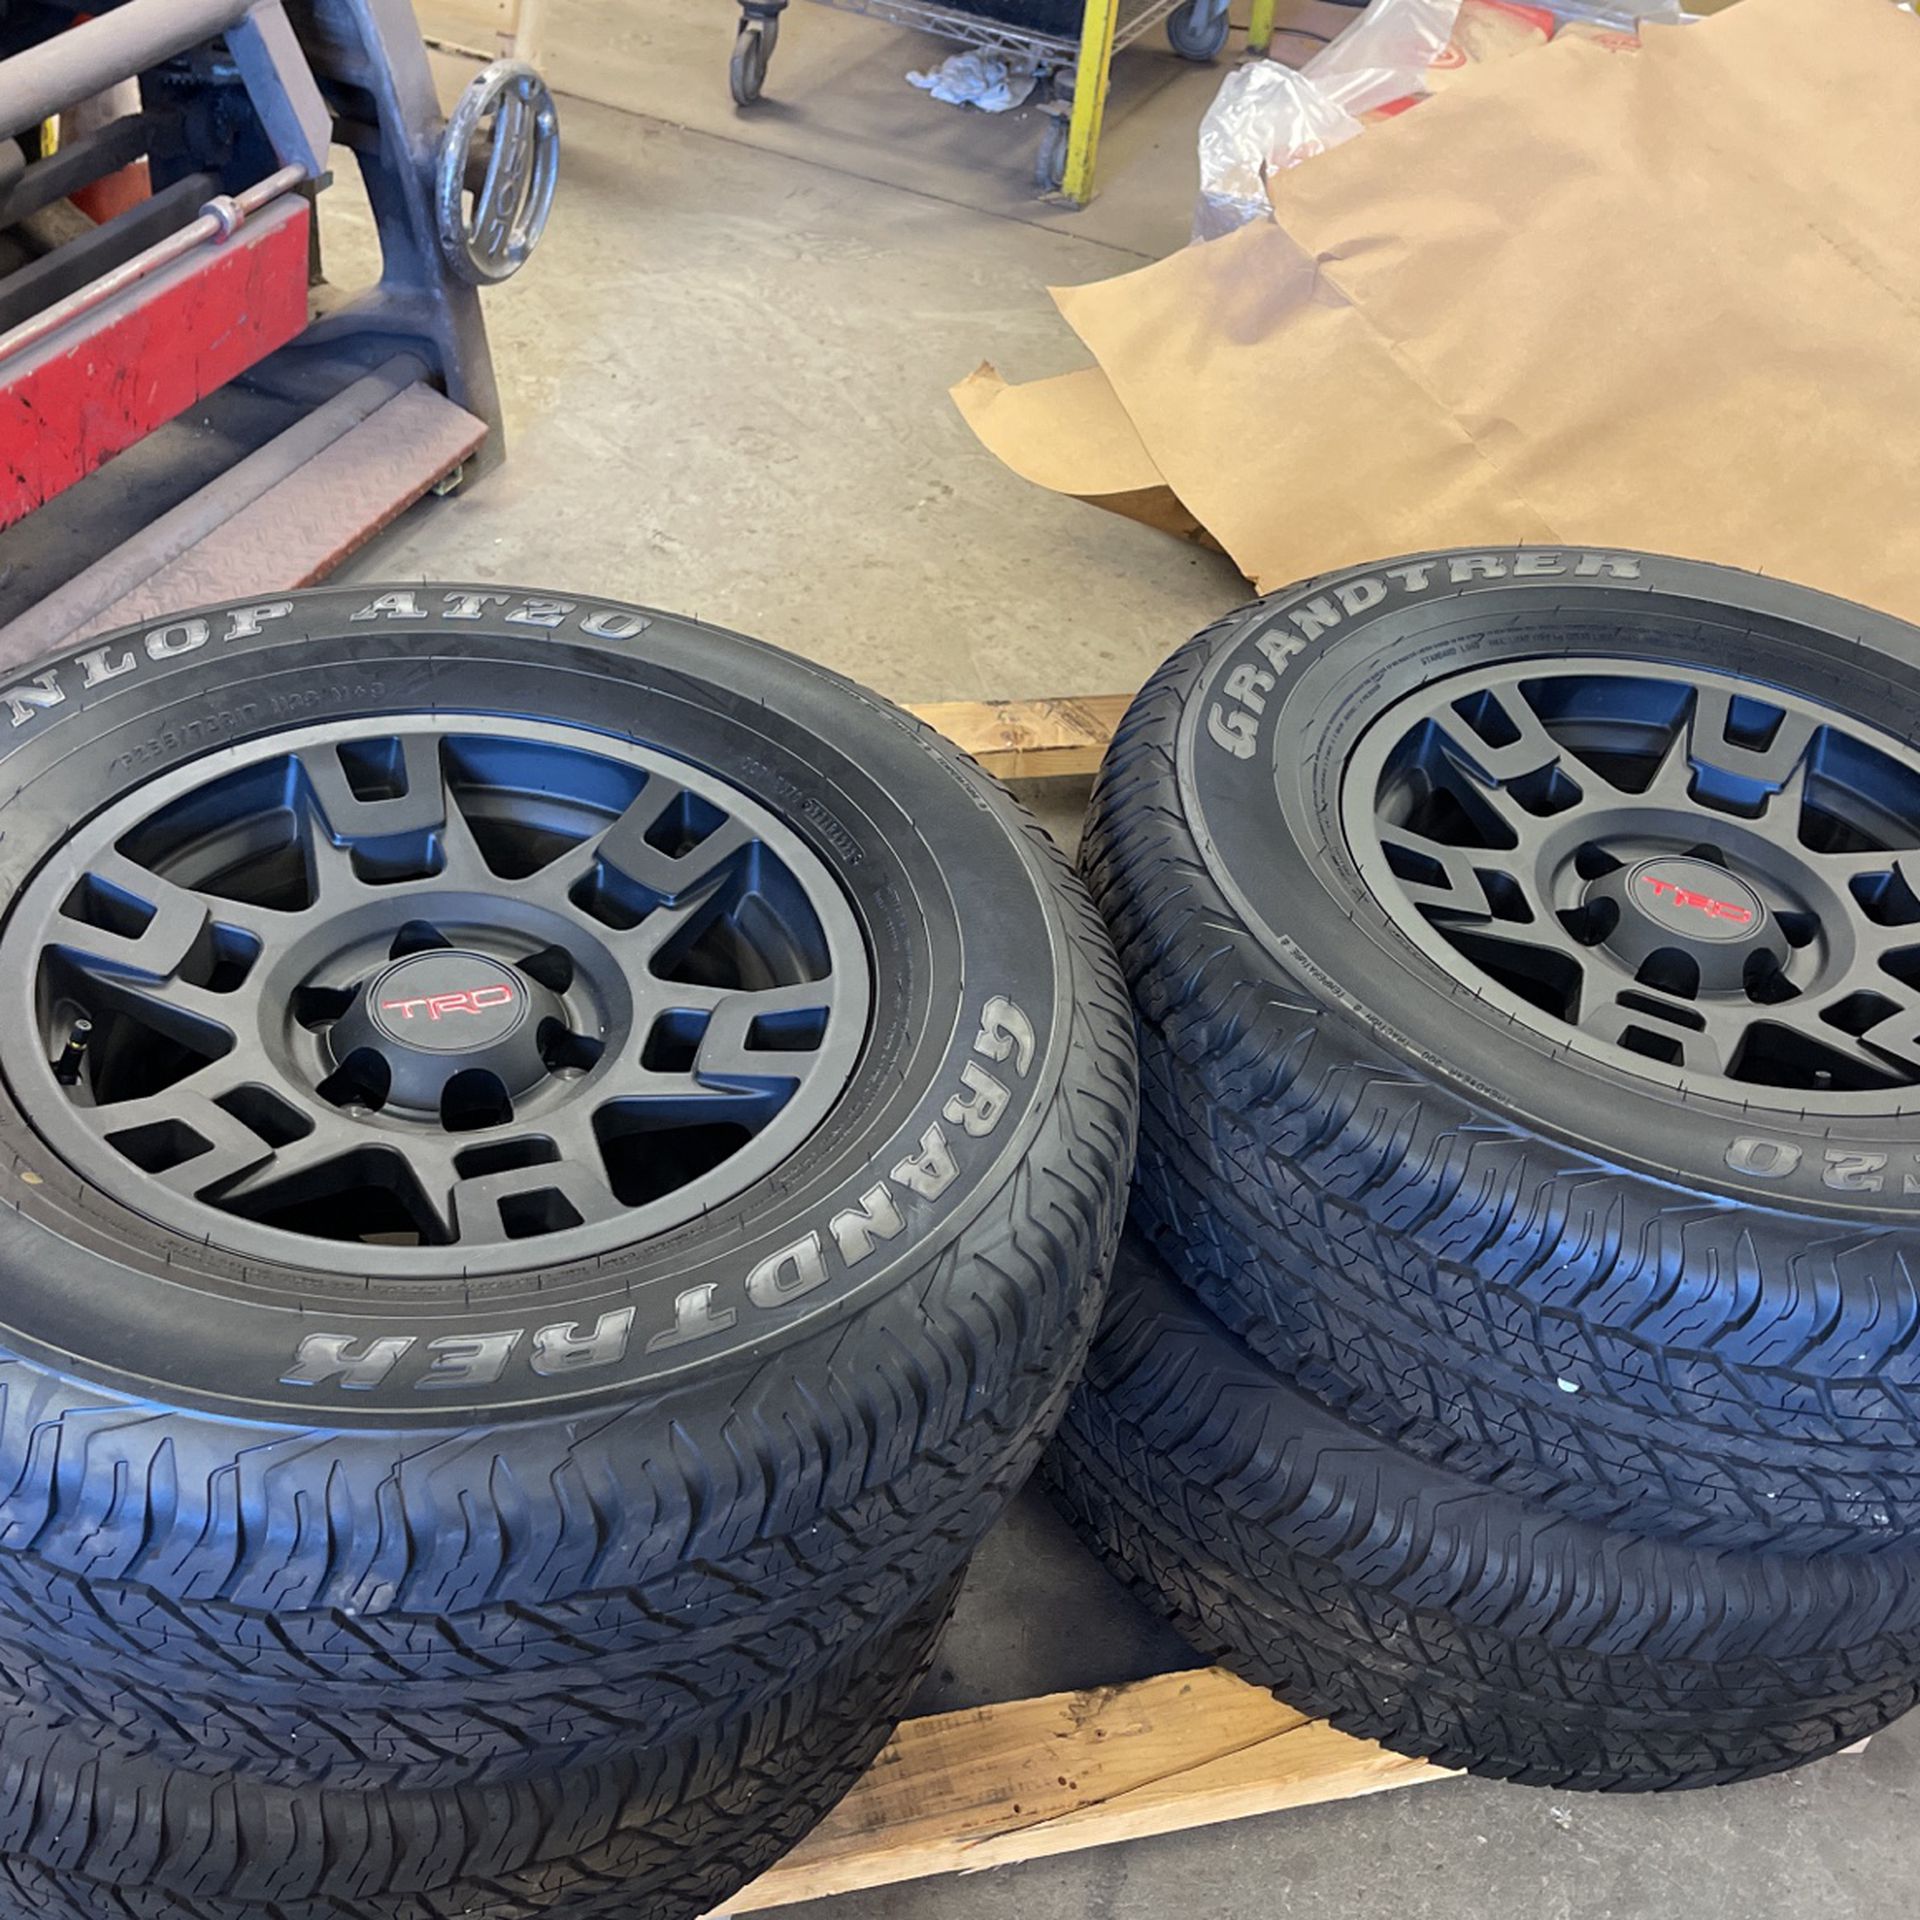 TRD Tires And Rims 